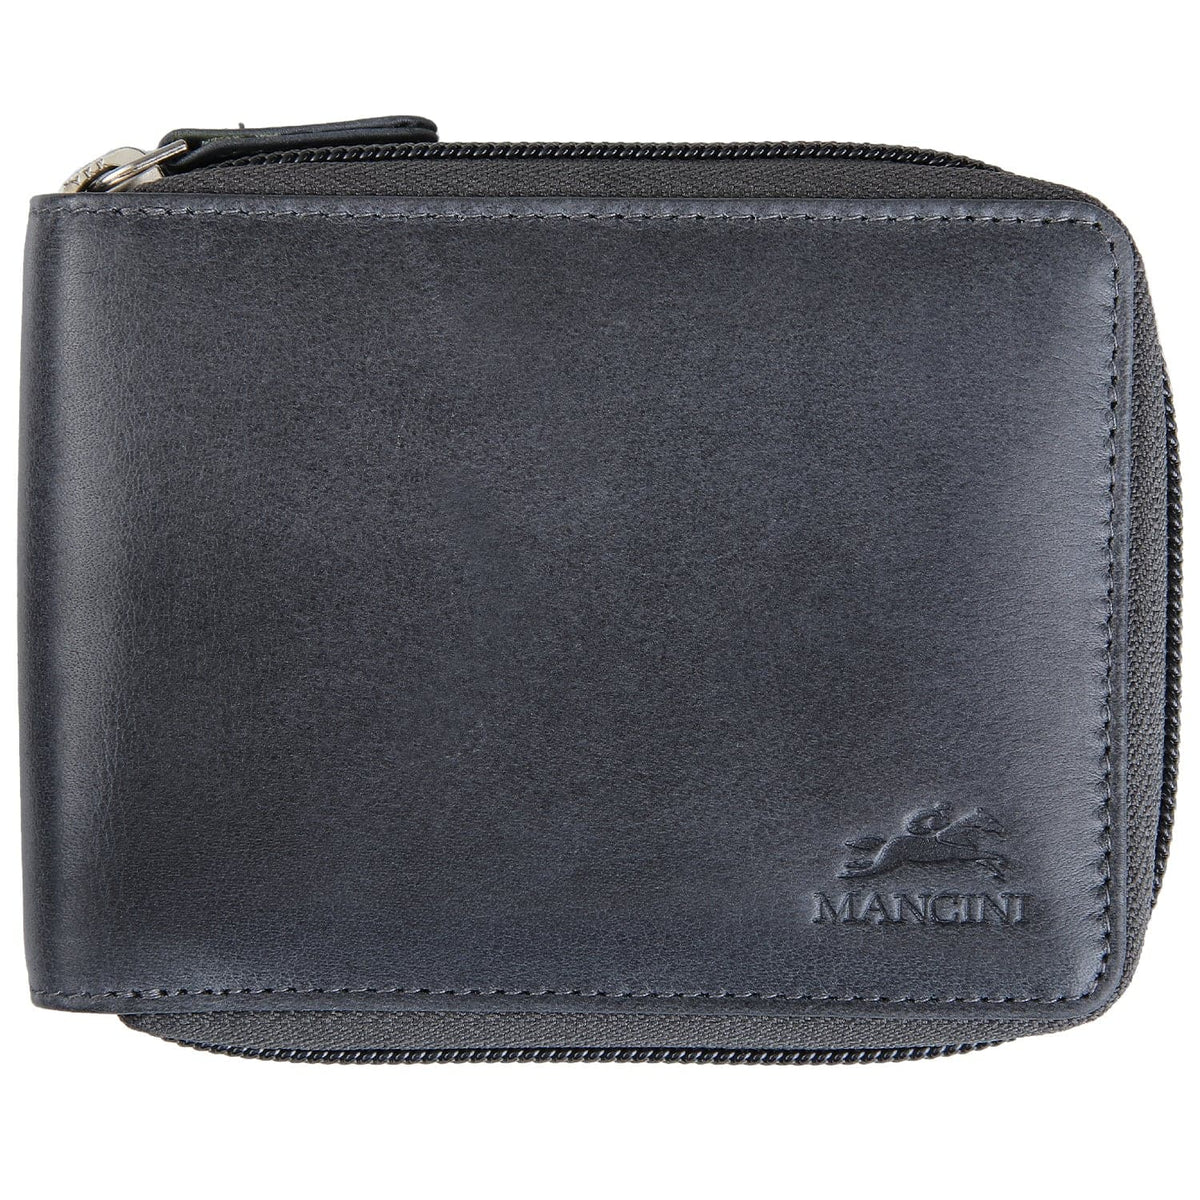 Mancini Bellagio RFID Zippered Wallet with Removable Passcase